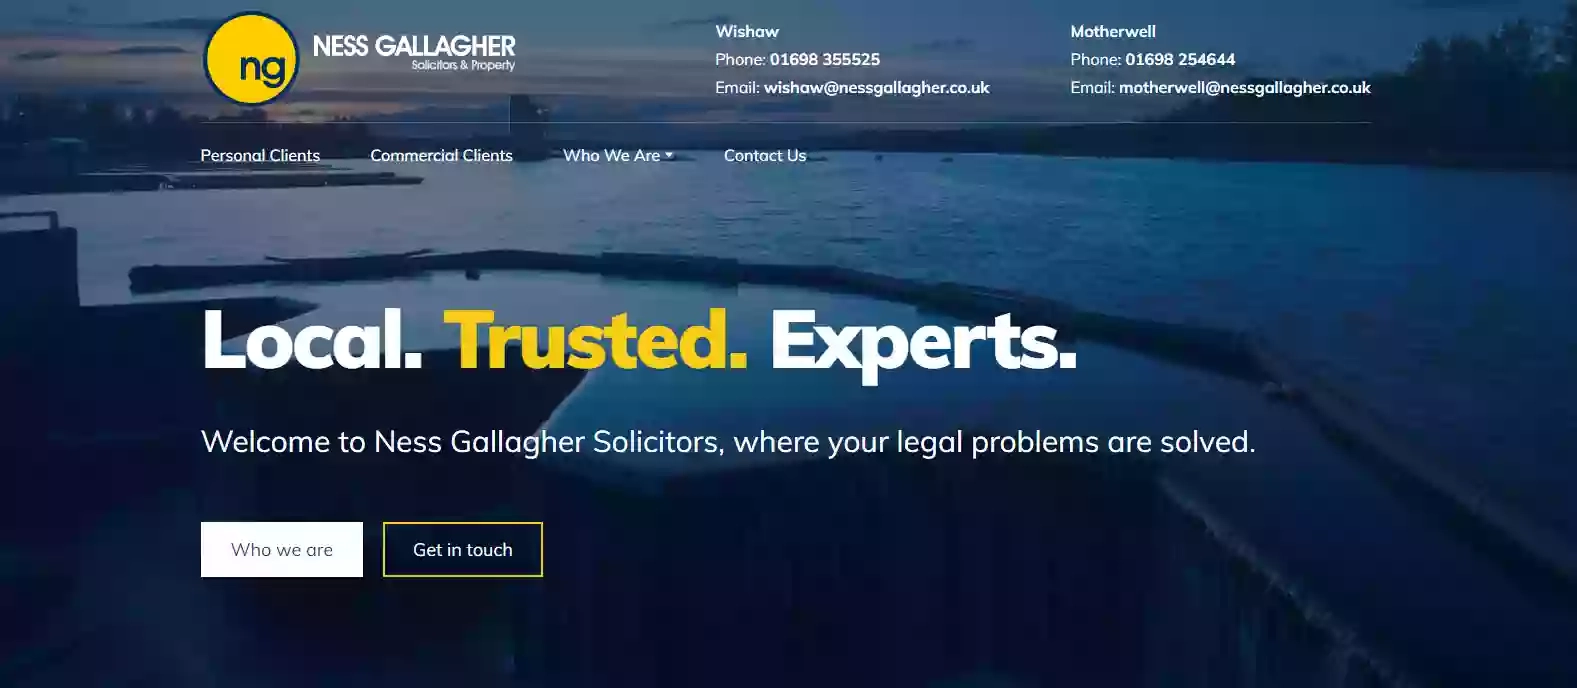 Ness Gallagher Solicitors & Property